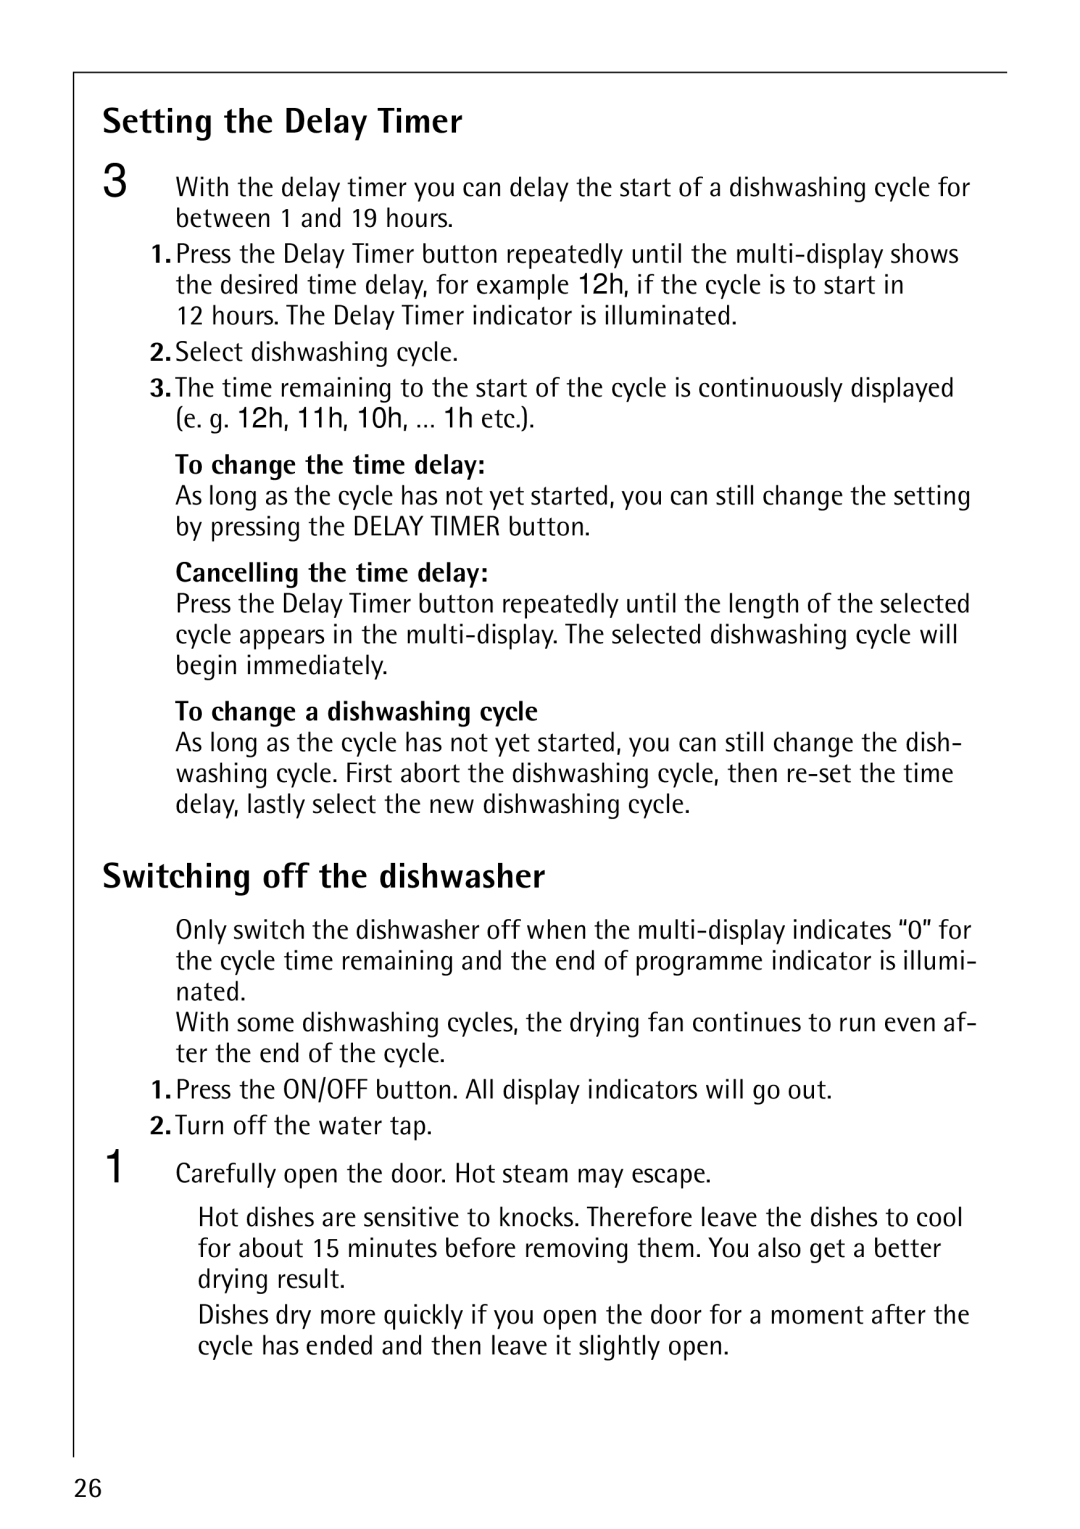 Electrolux FAVORIT 86070i manual Setting the Delay Timer, Switching off the dishwasher, To change the time delay 